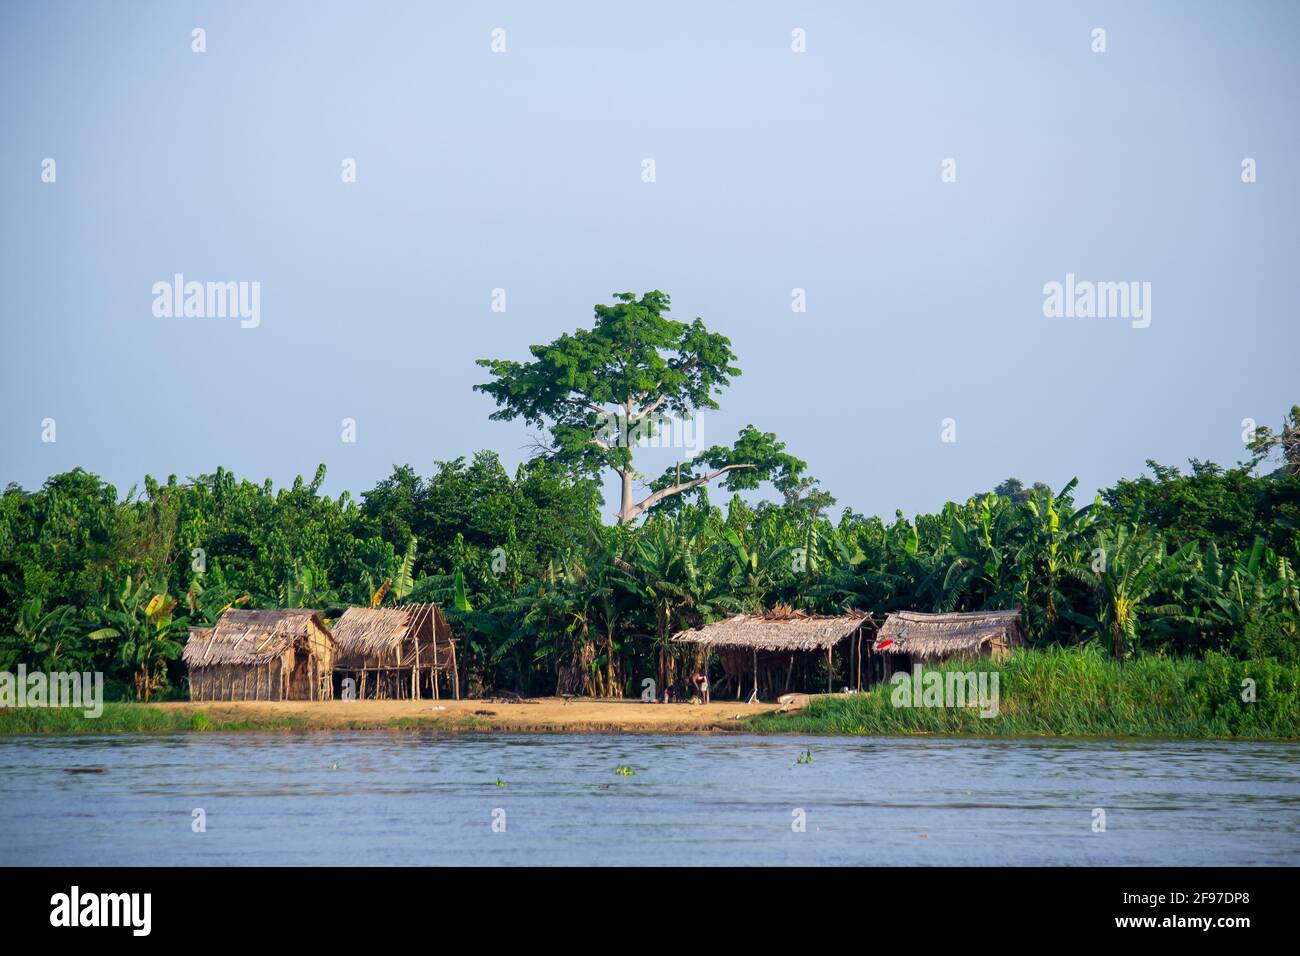 Rdc High Resolution Stock Photography and Images - Alamy